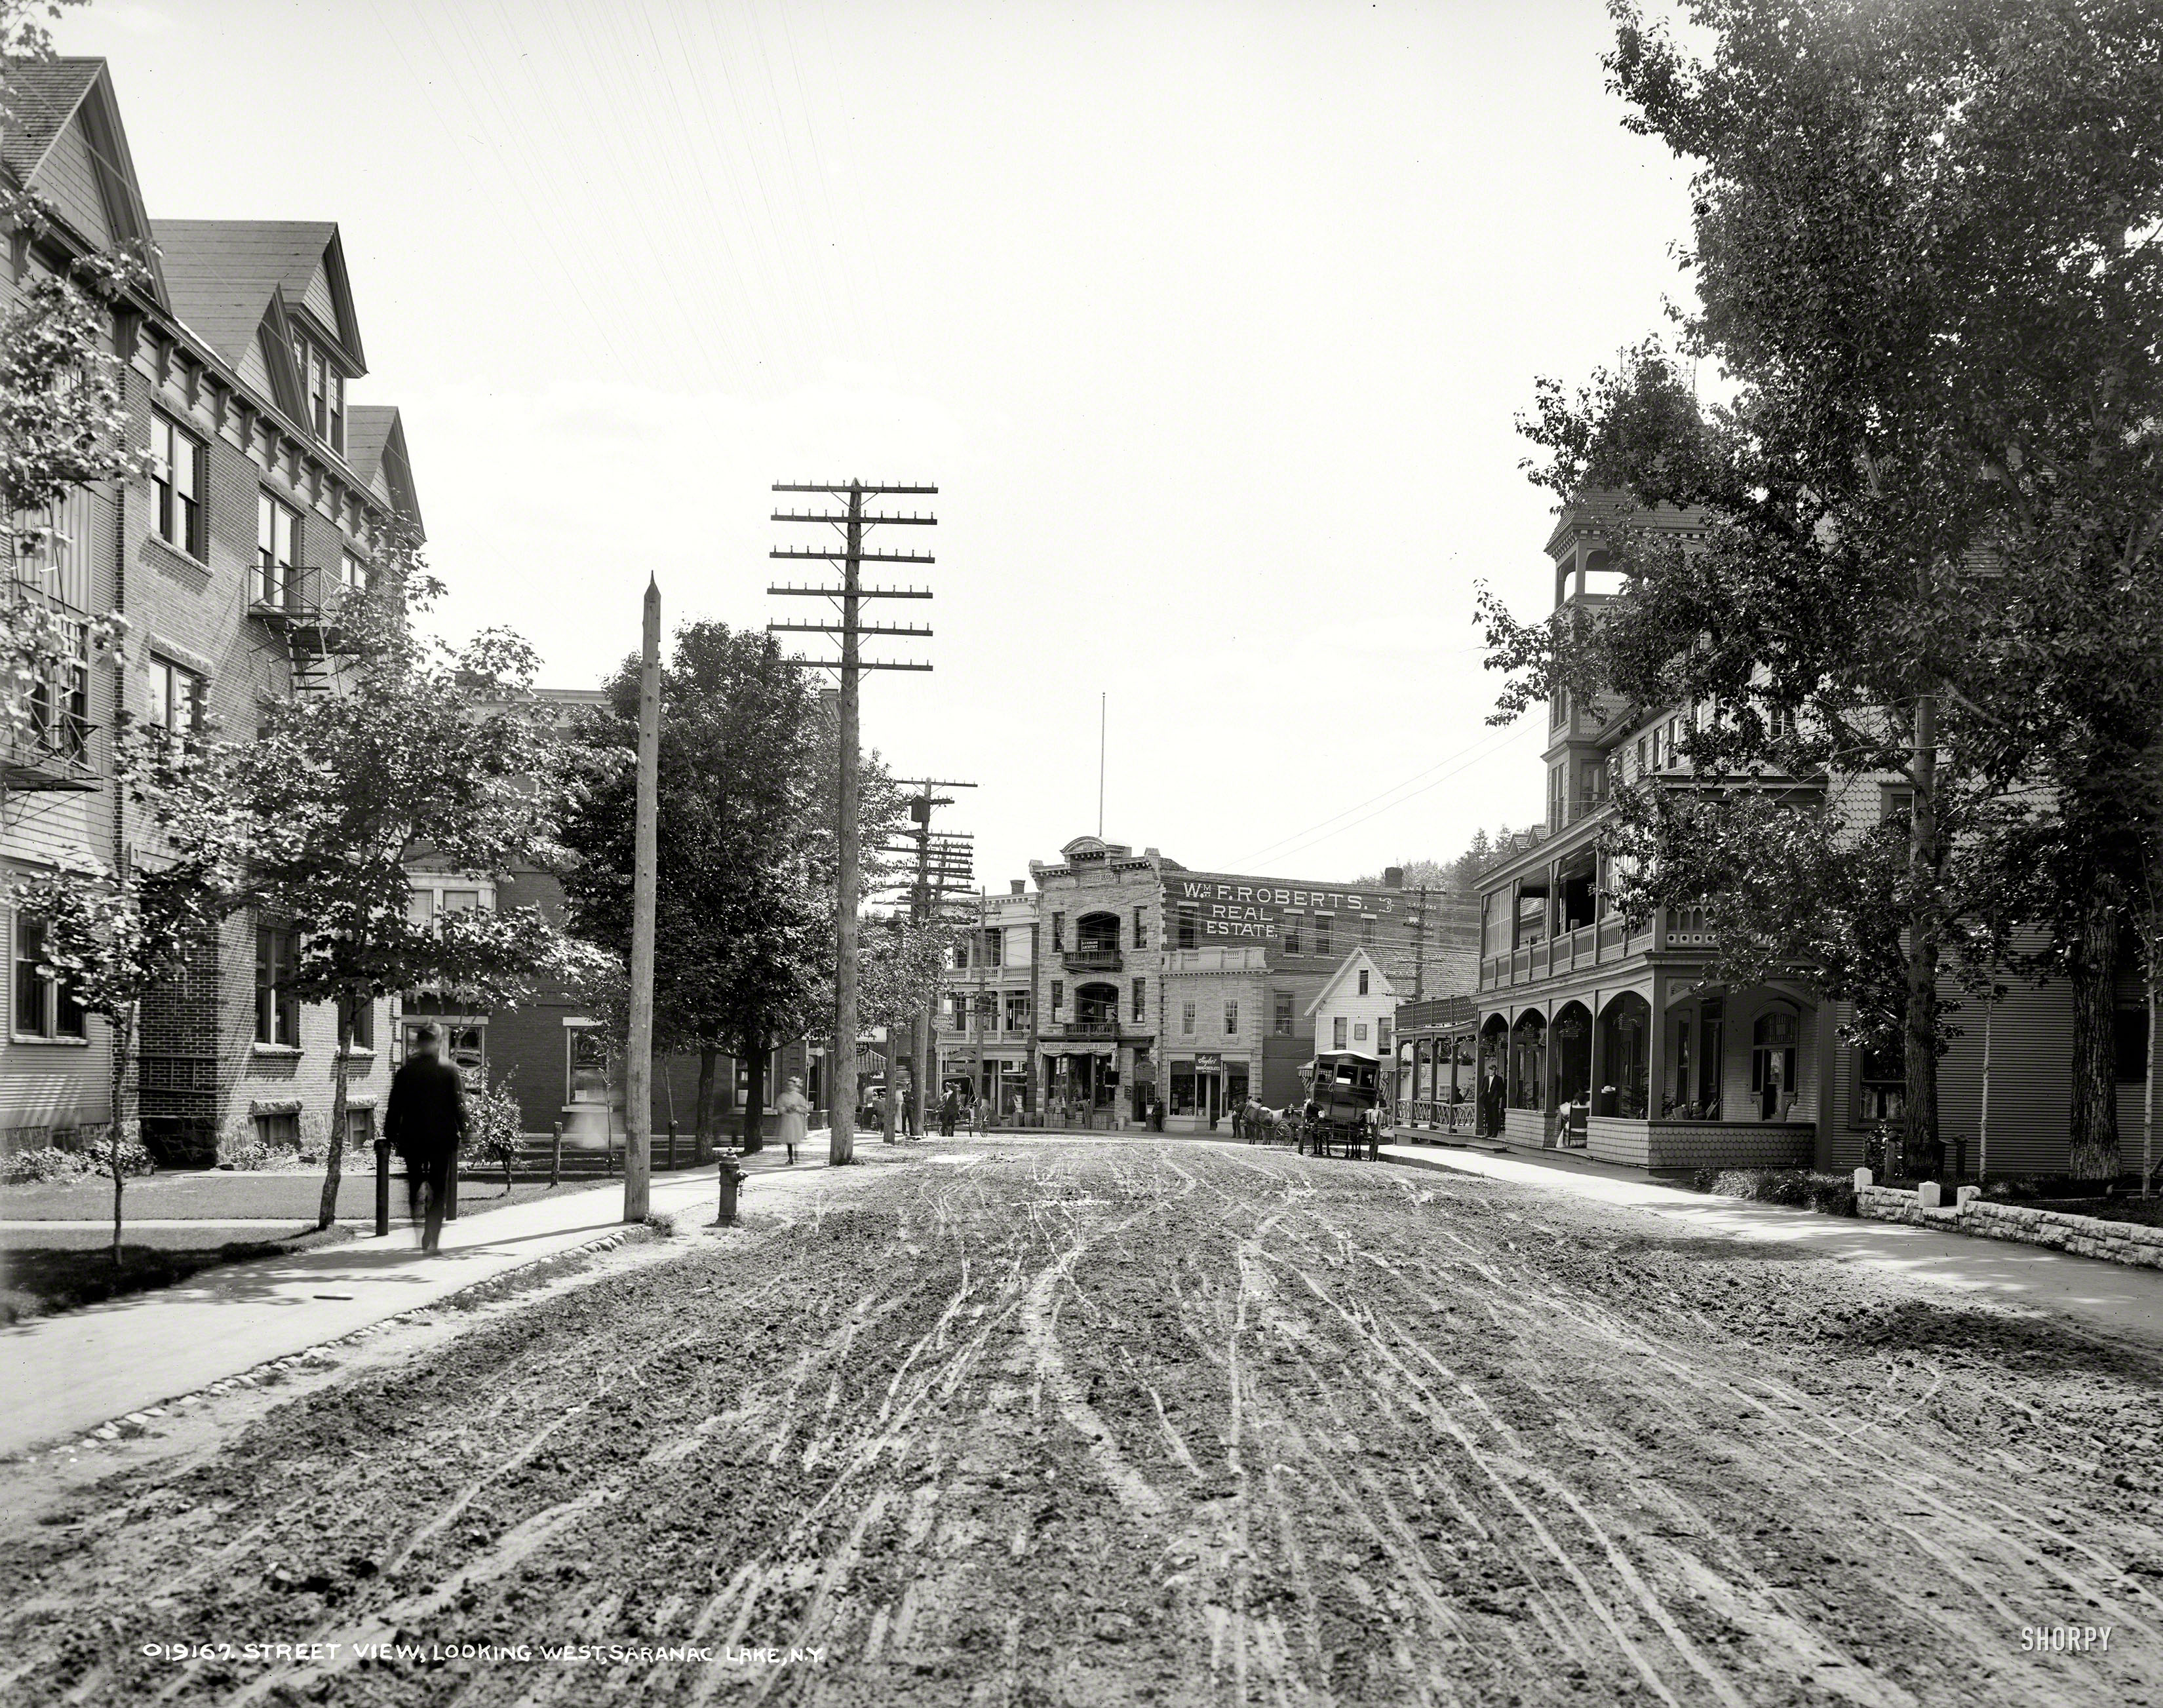 Circa 1906. Saranac Lake, N.Y. "Street view looking west." Back when the Google-Wagon used glass negatives. 8x10 inch dry plate. View full size.